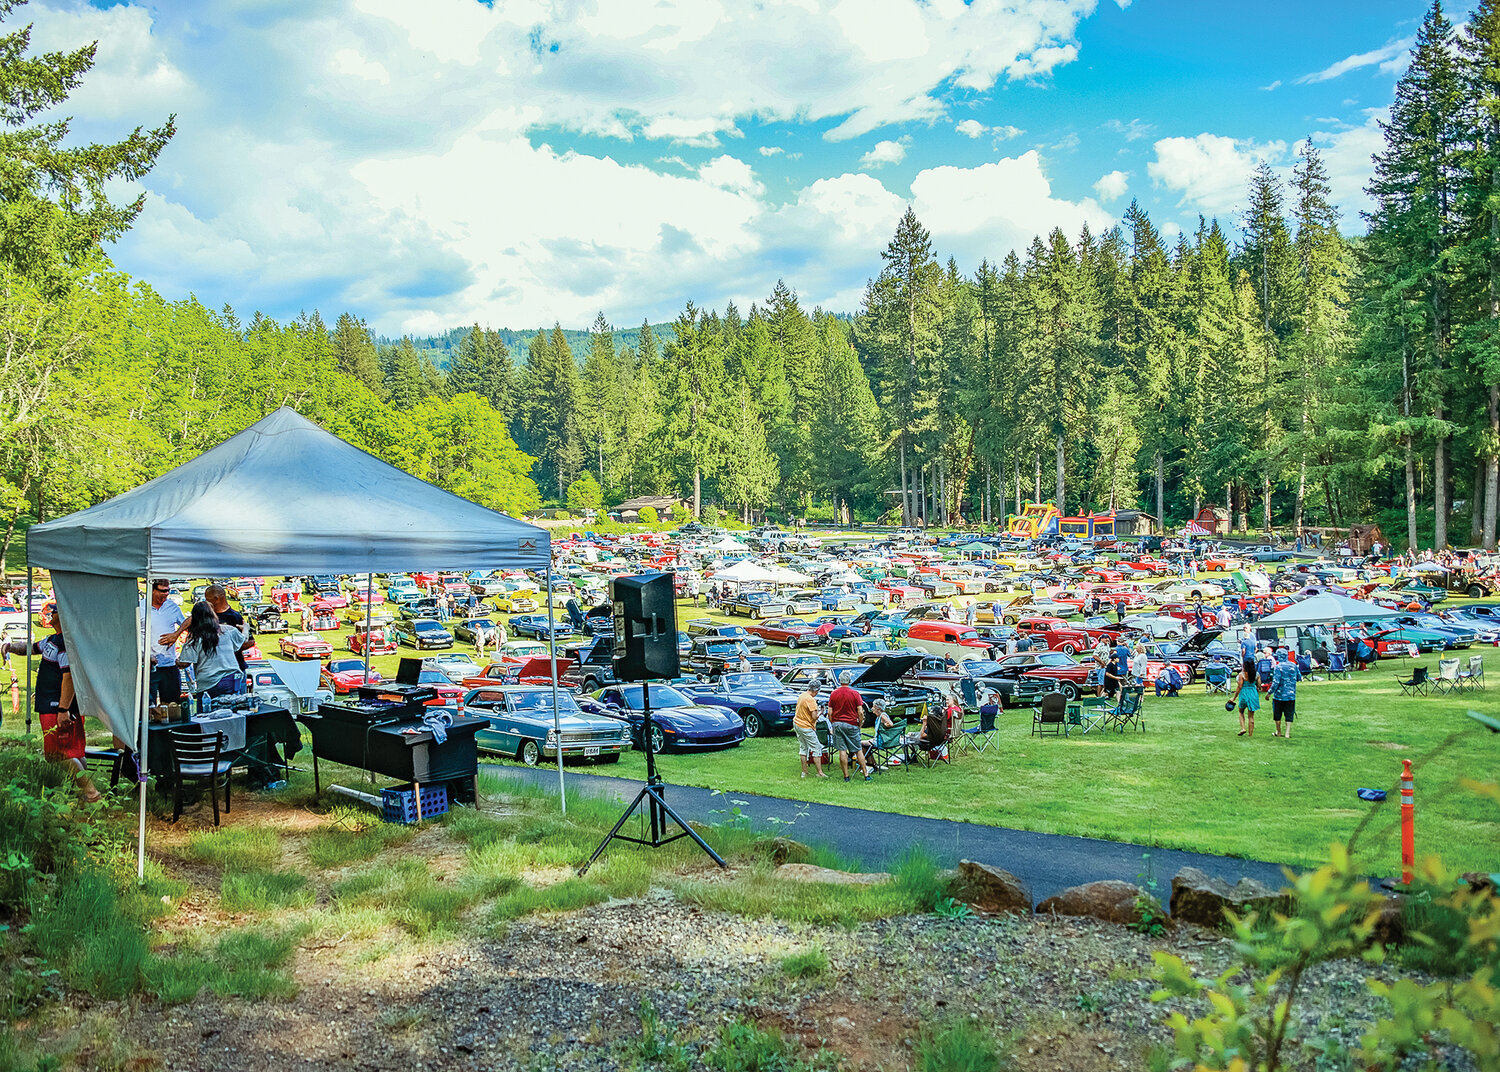 Special interest vehicles fill the cruise-in area of Alderbrook Park for the first cruise-in of the summer on Friday, May 26.